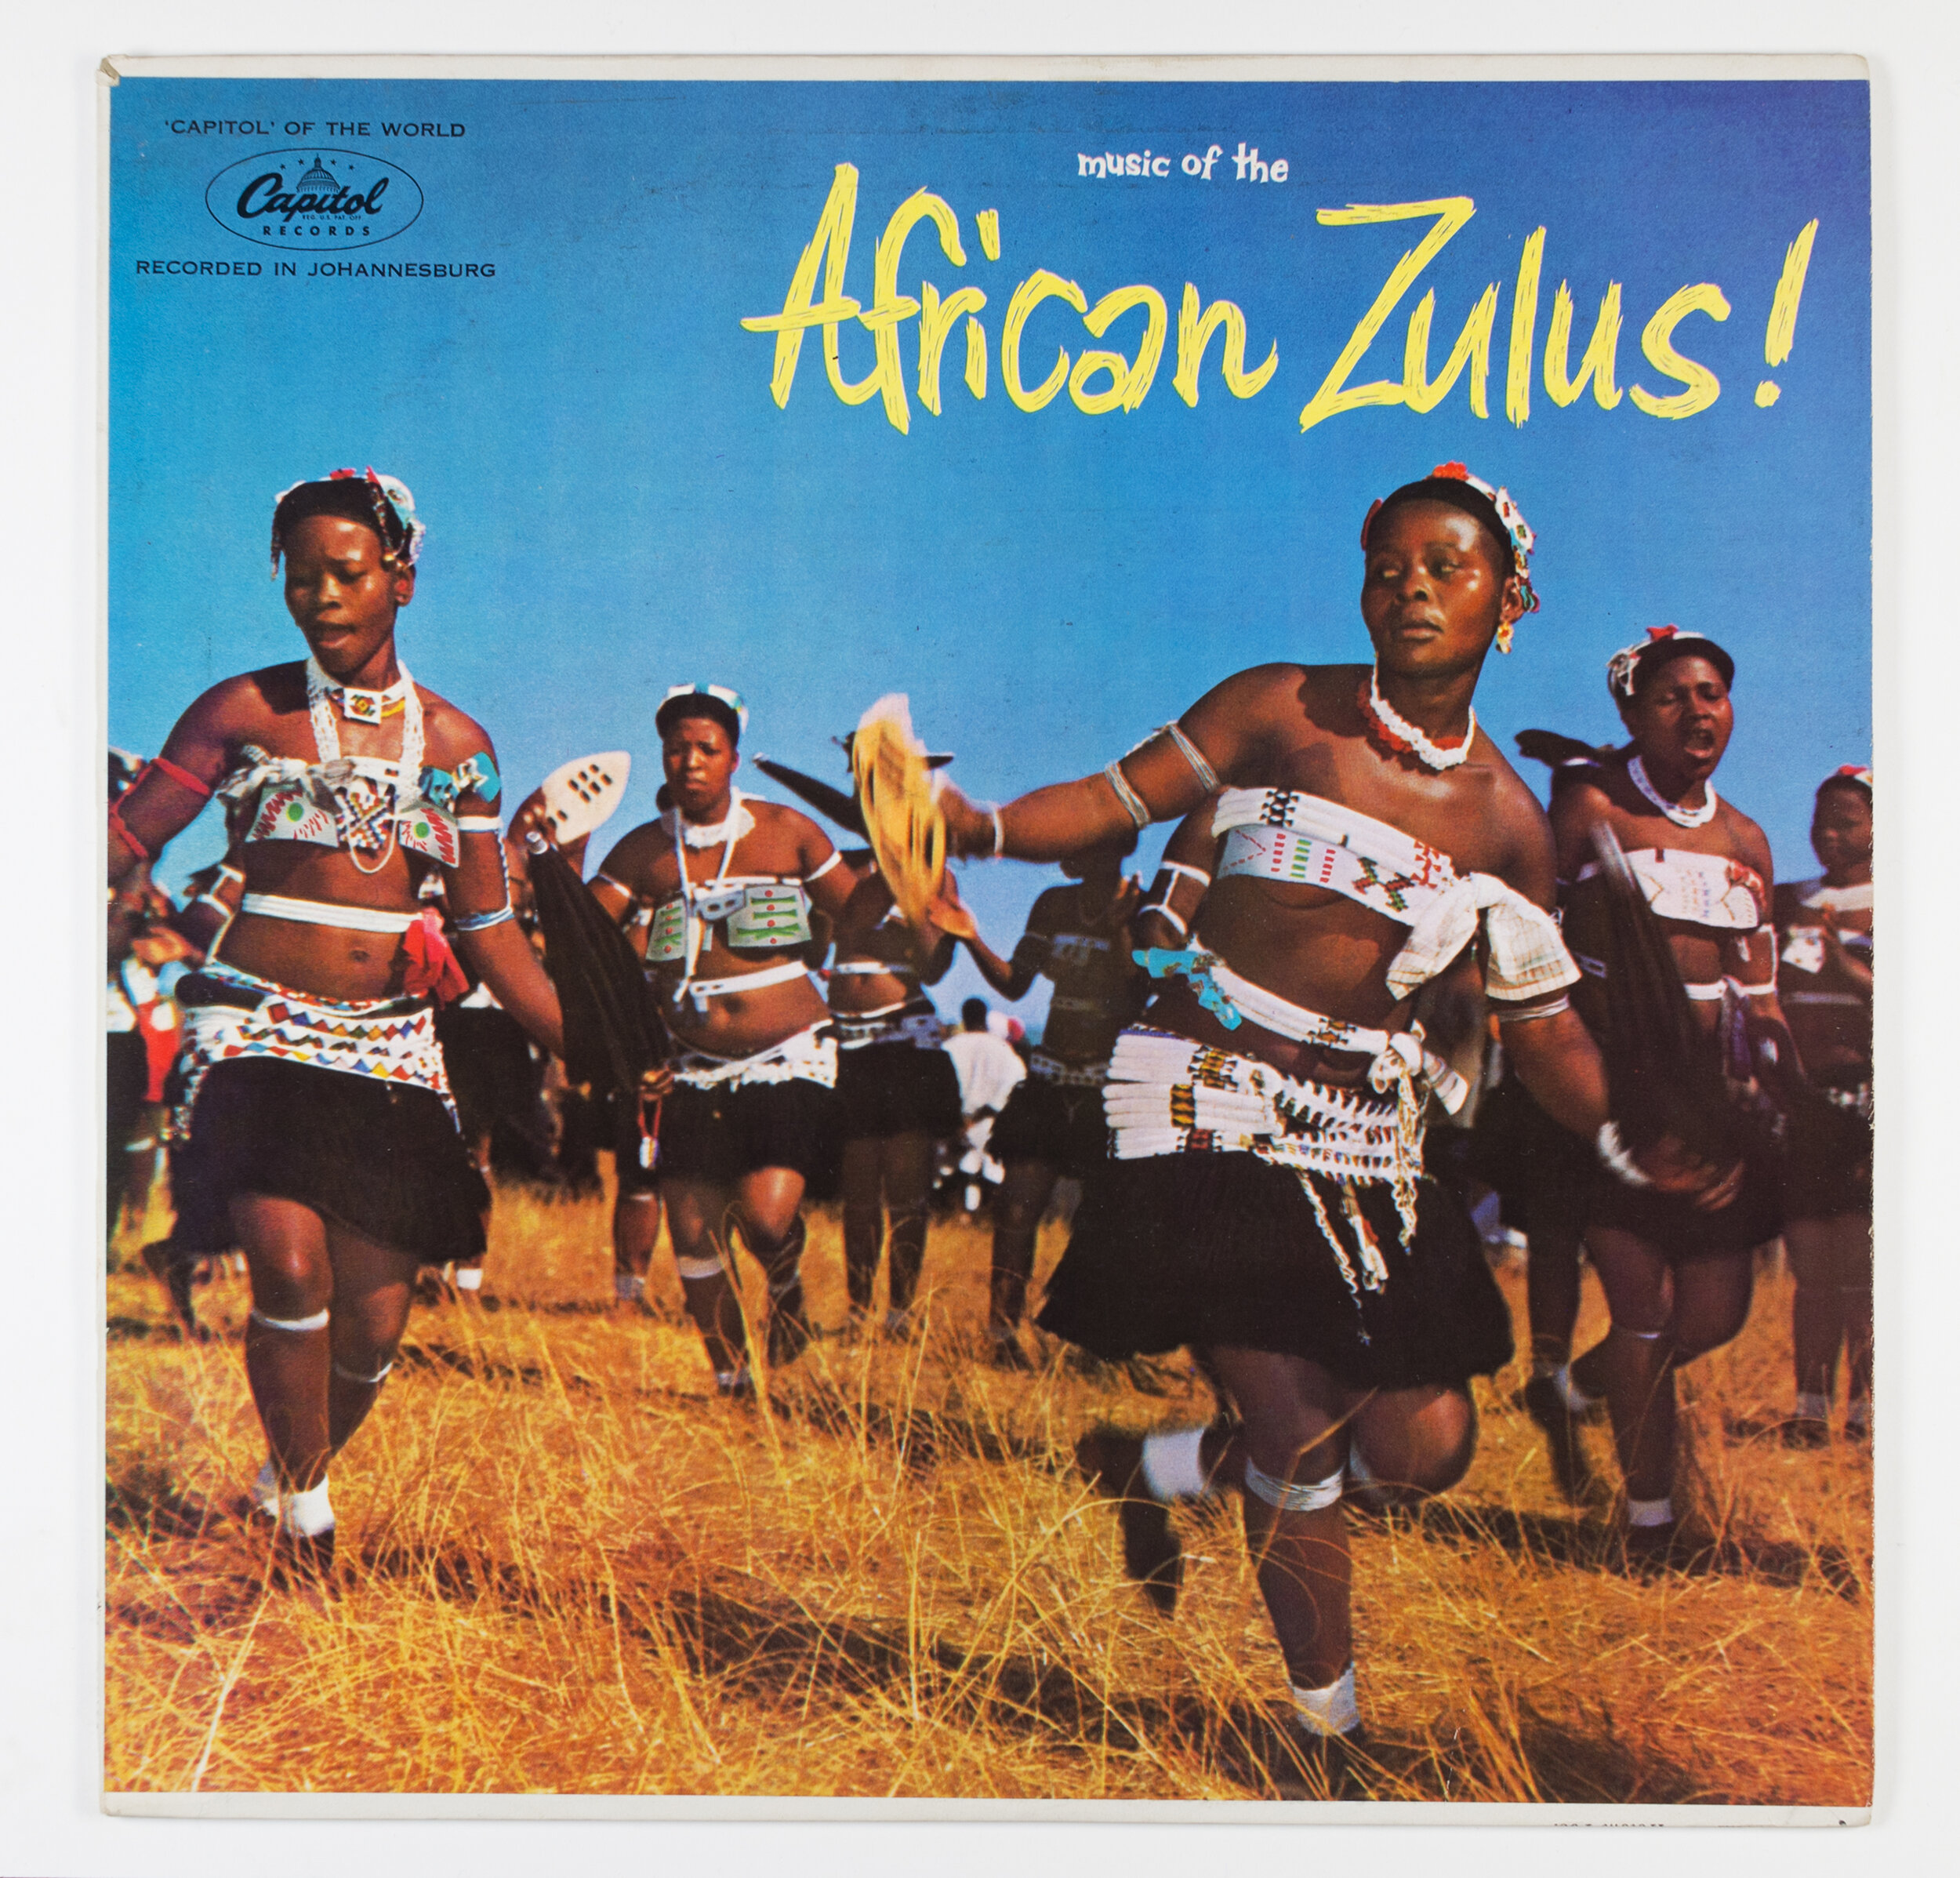 Music of the African Zulus